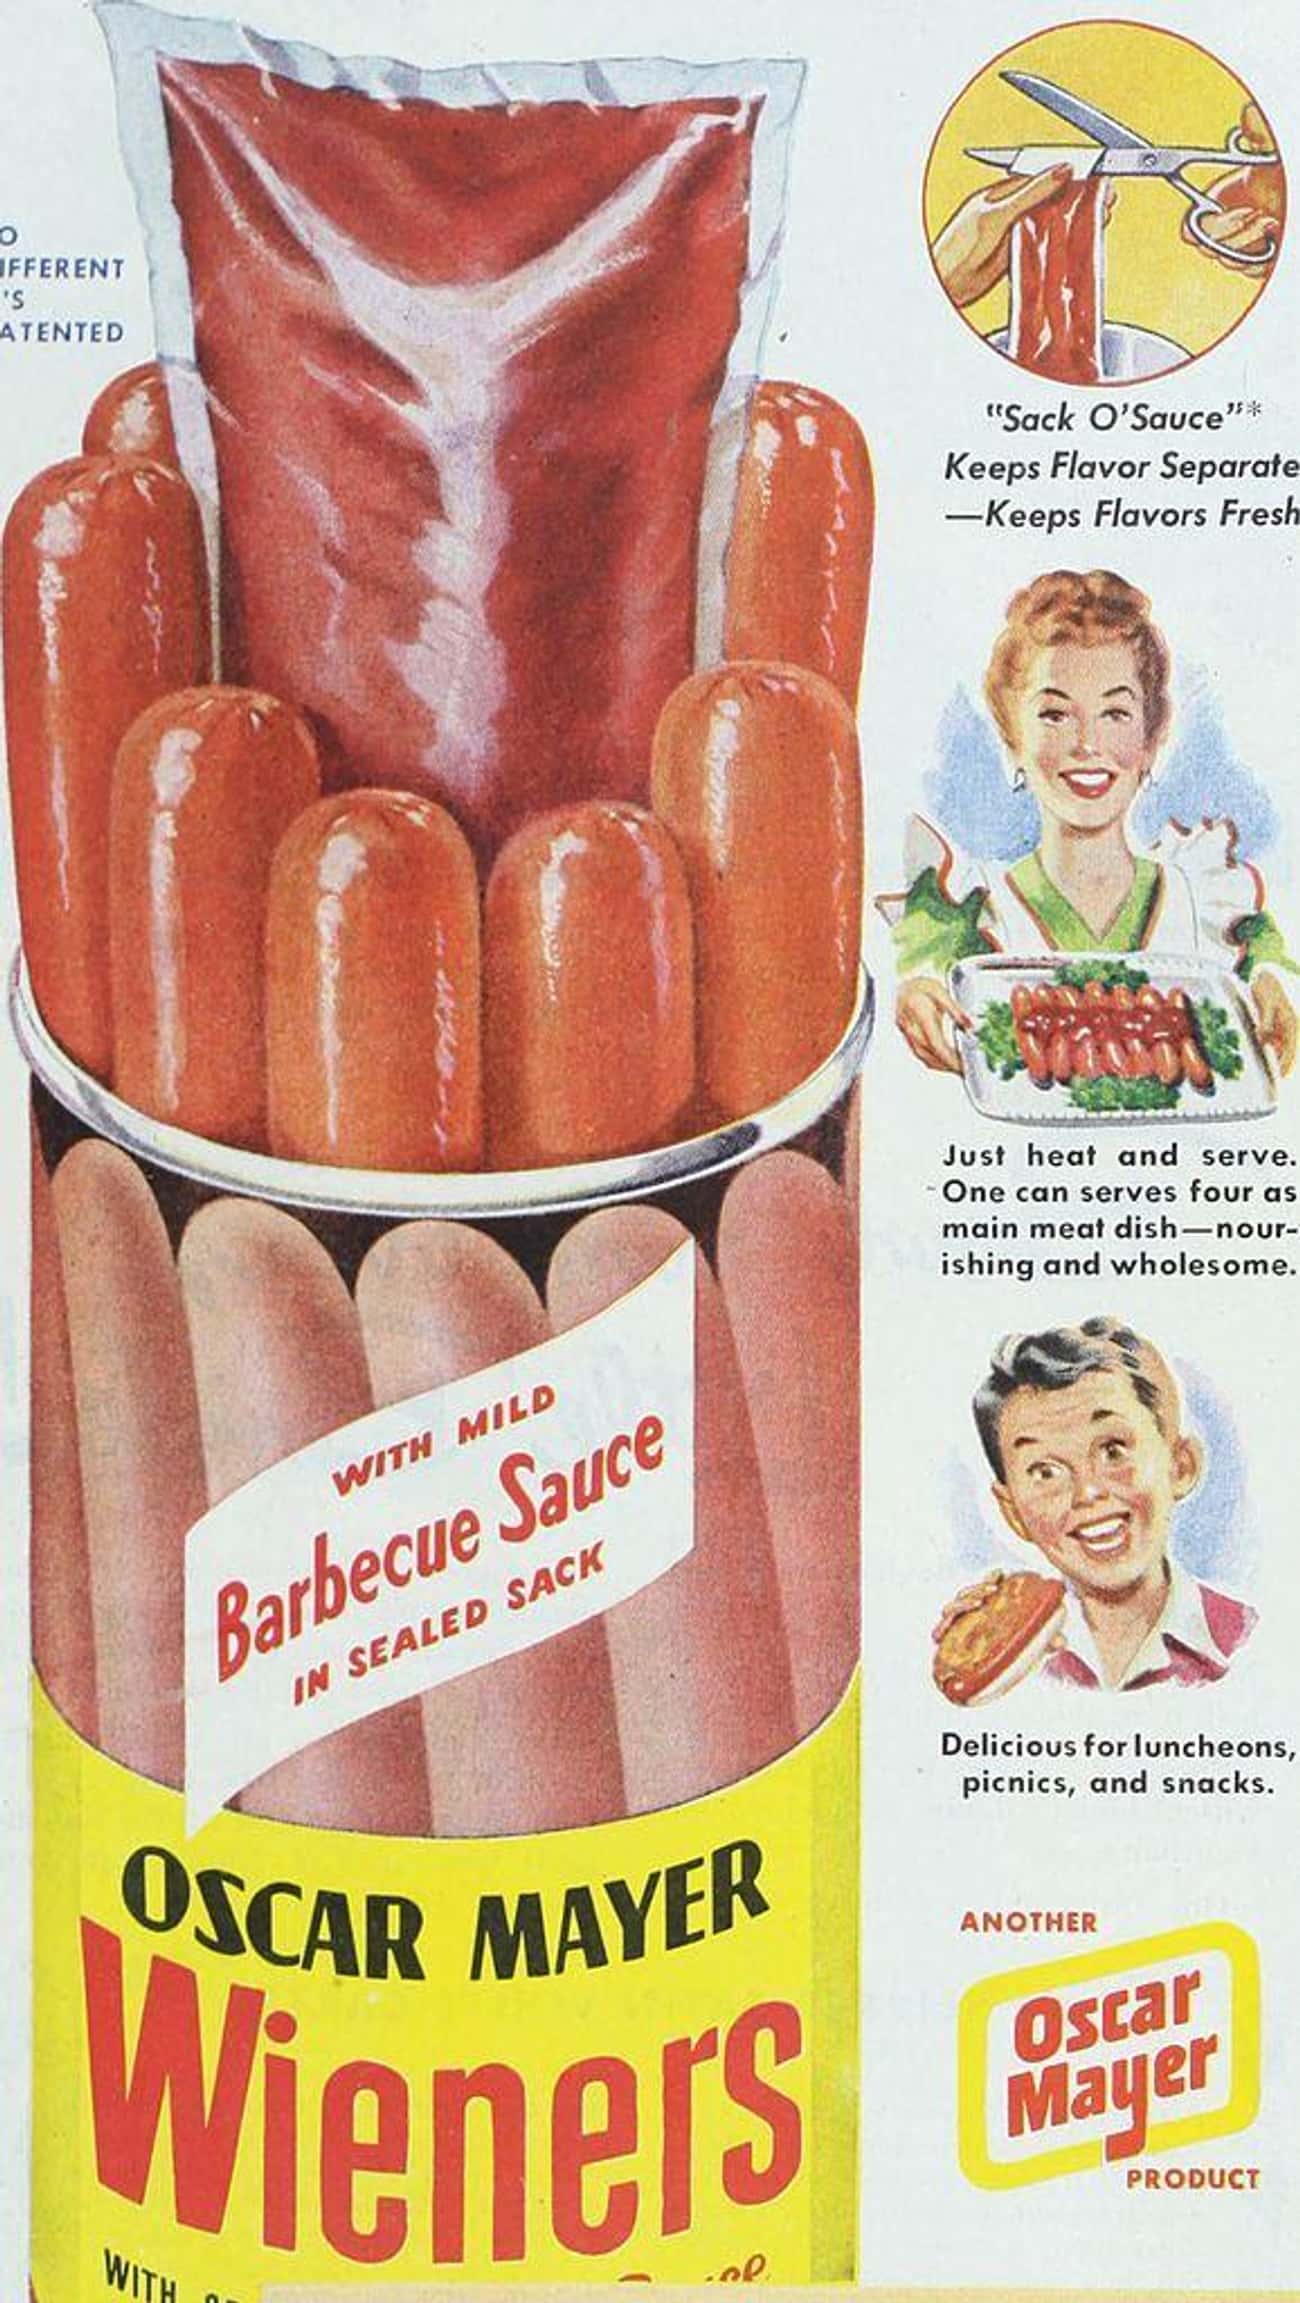 1883 - Oscar Mayer Was Founded The Year Of Buffalo Bill's First Wild West Show